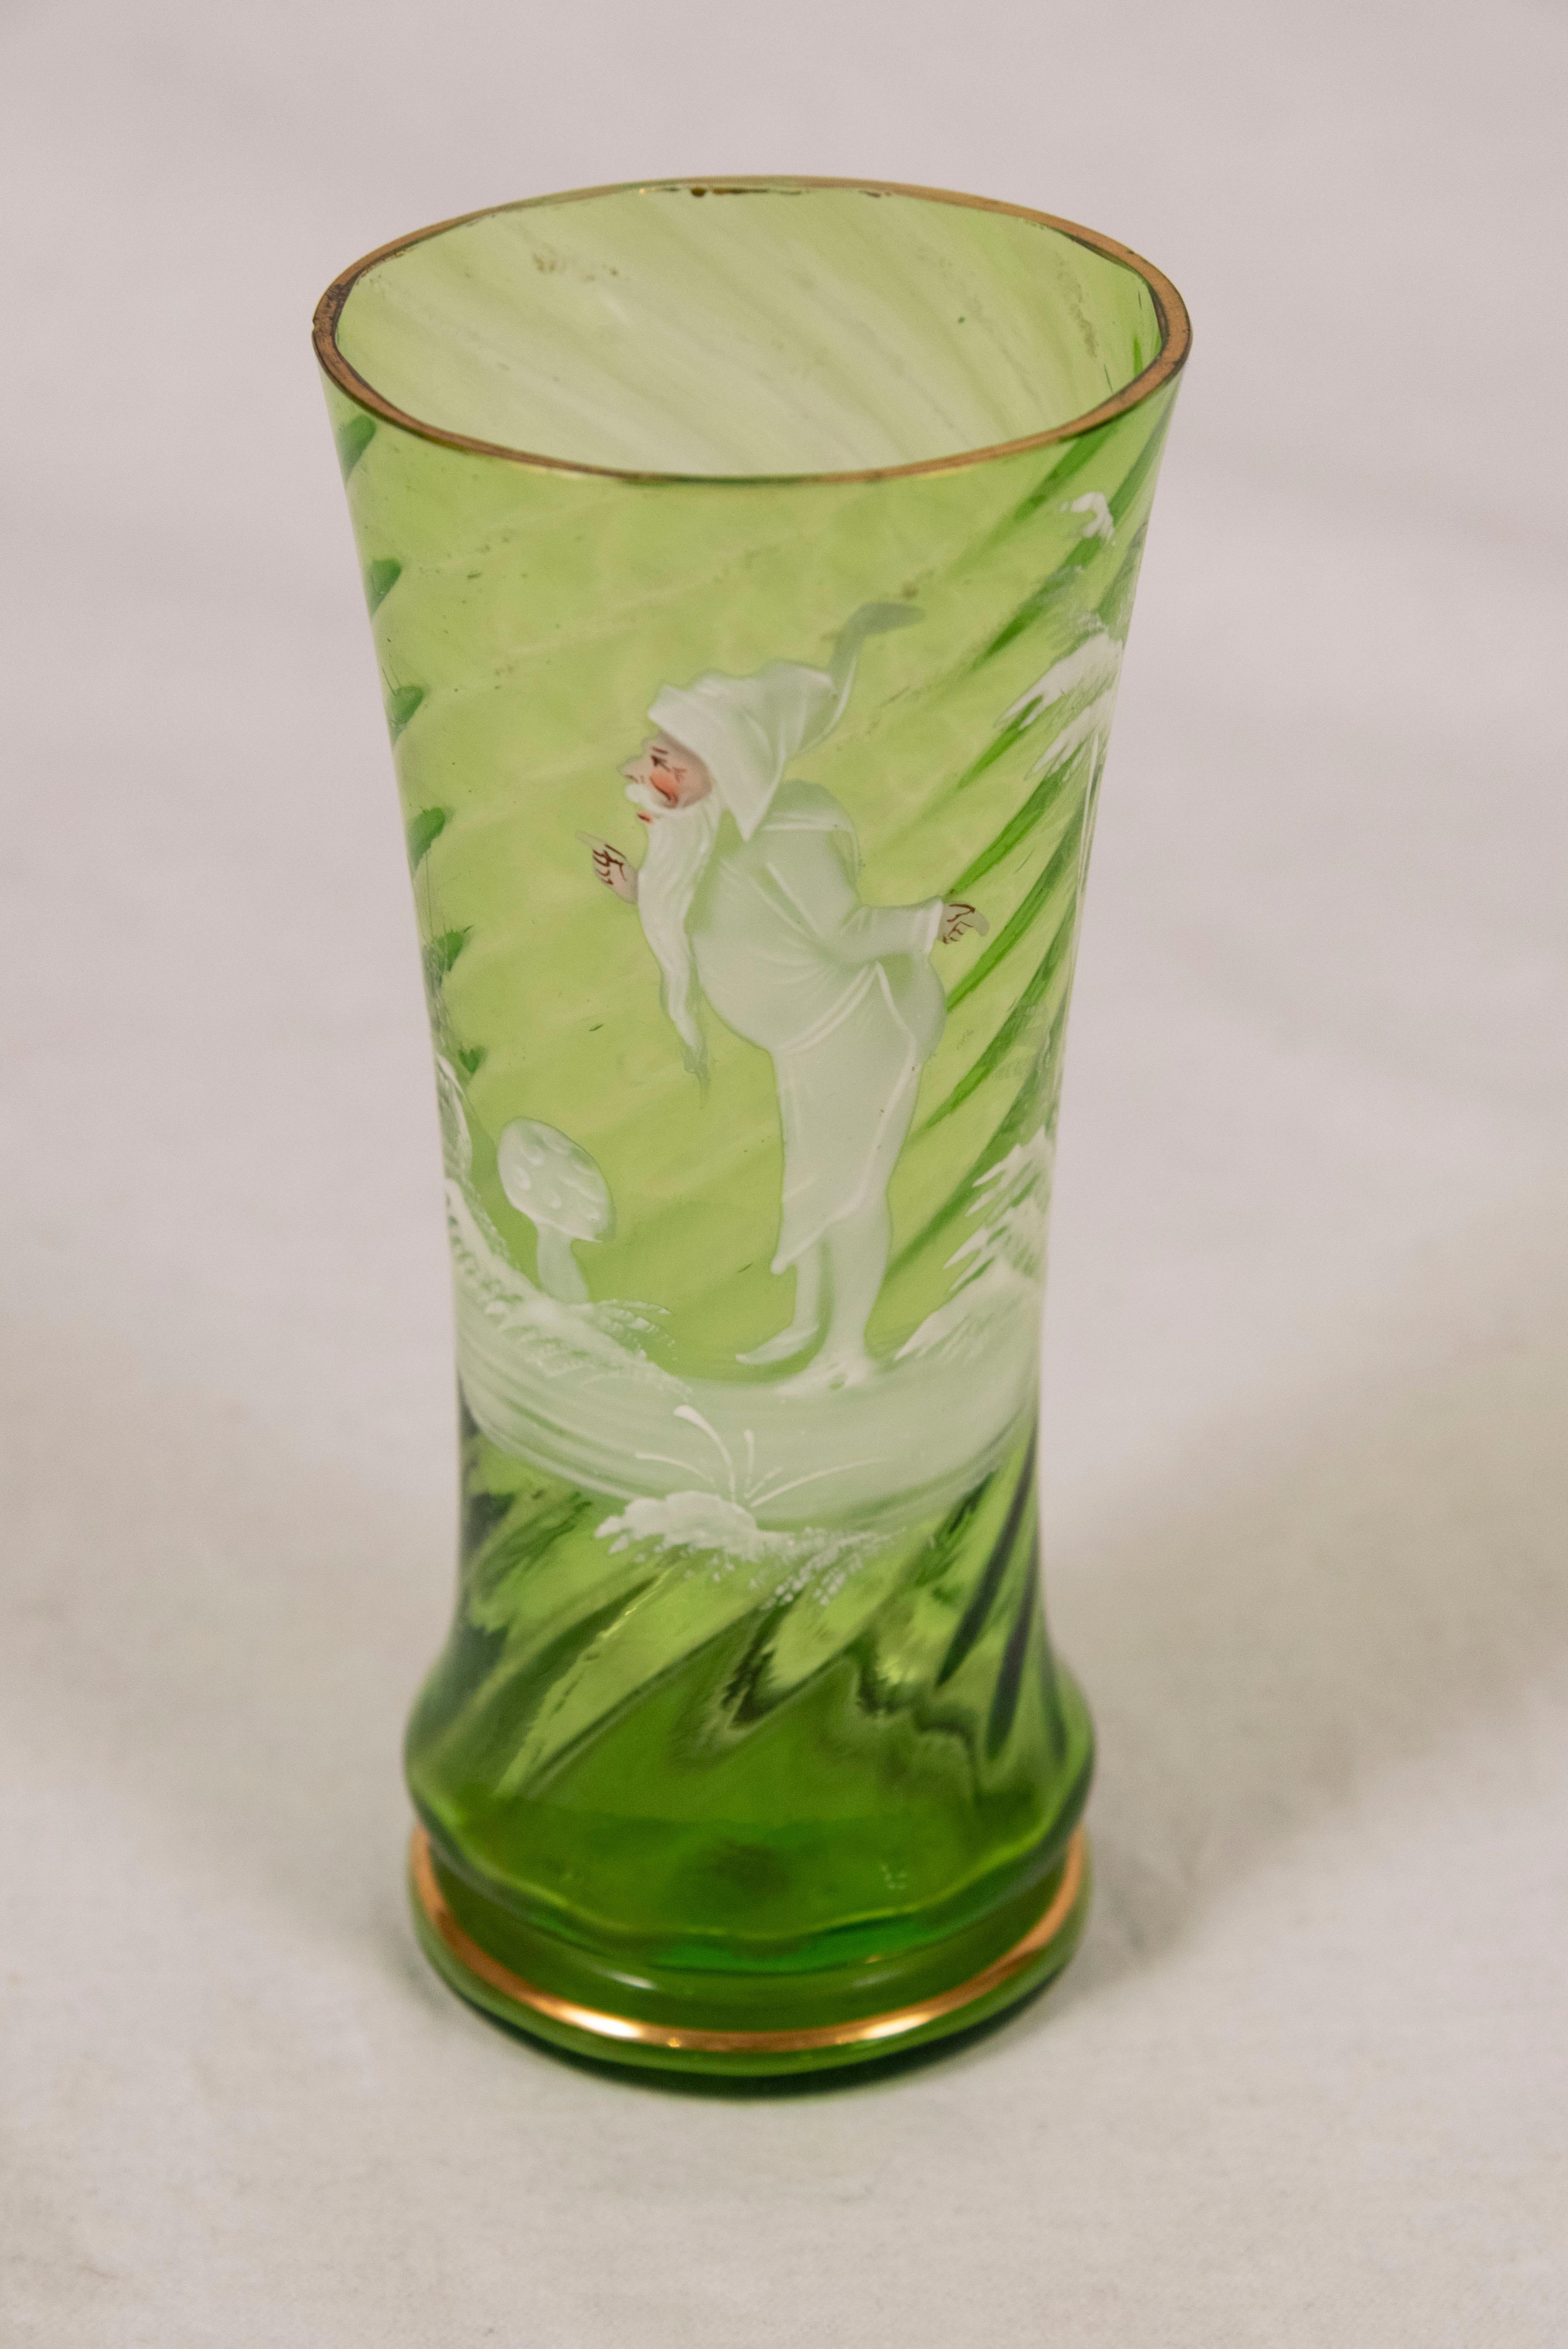 Mary Gregory (American) Green glass five-piece lemonade set comprising a swirled pitcher with flared mouth and applied handle, and four matching tumblers, each decorated with a gnome figure amongst mushrooms in a wintery wooded landscape.